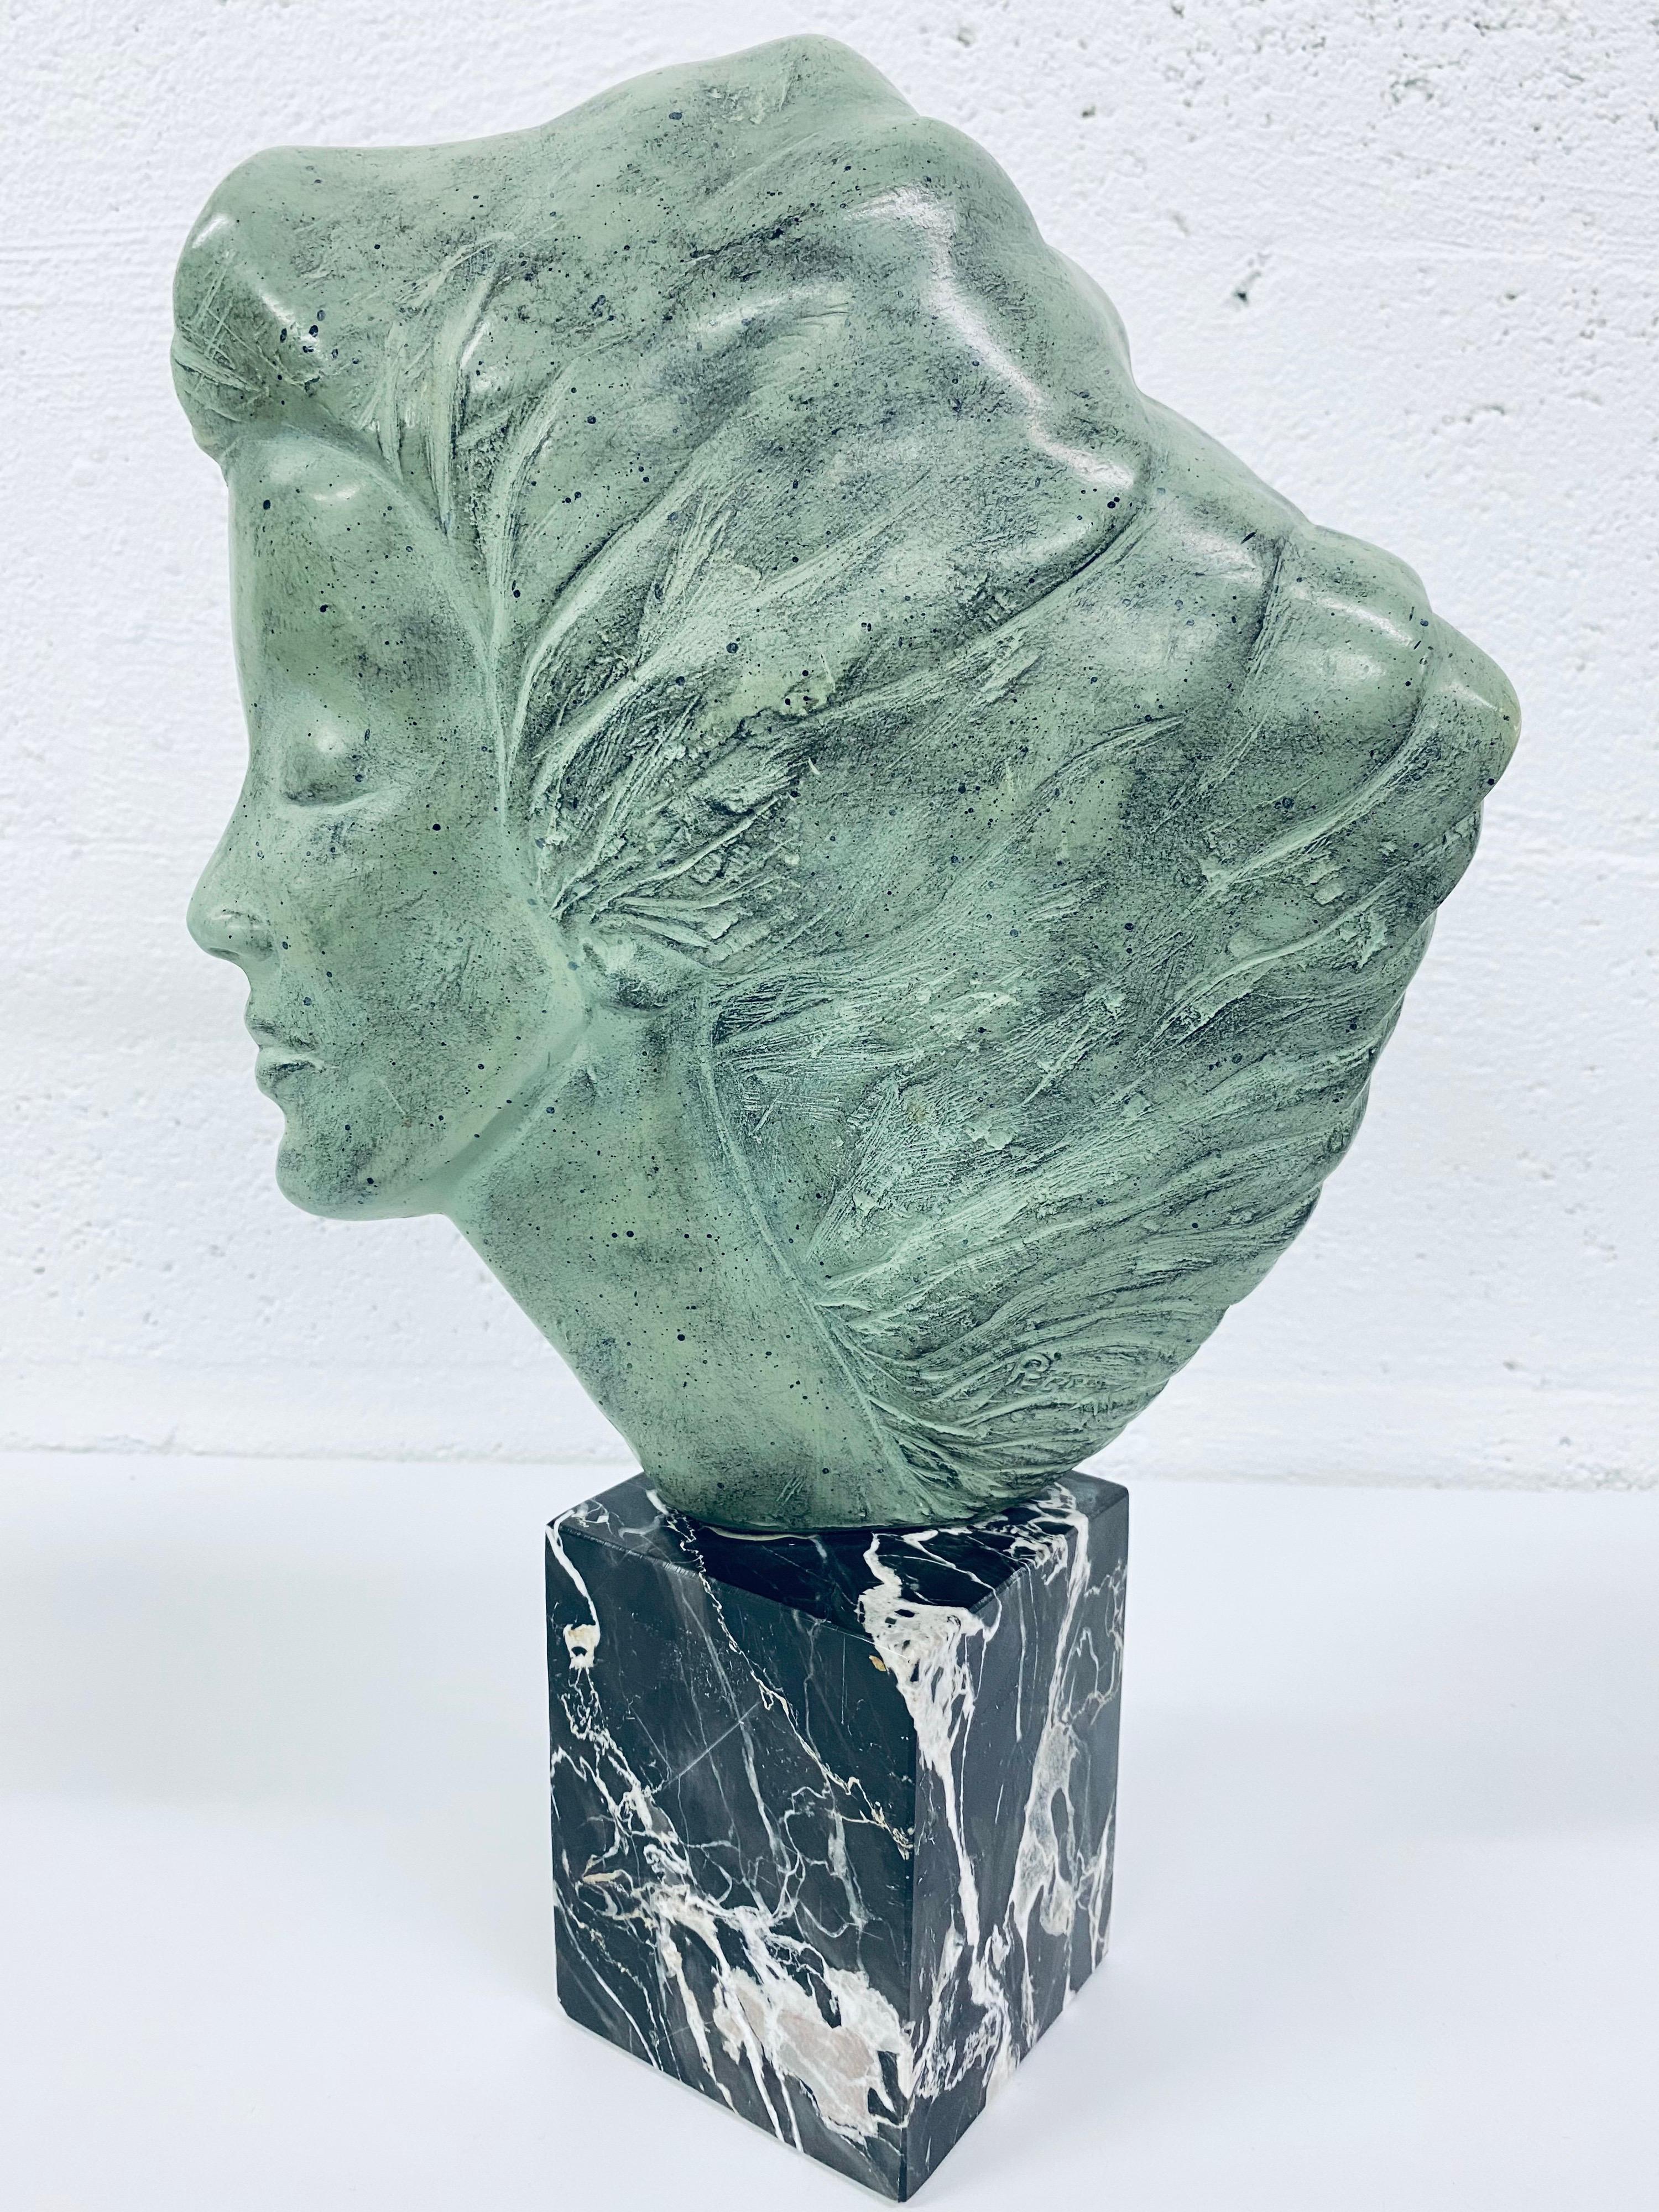 Midcentury resin sculpture of a woman with long flowing hair on marble base by Peggy Mach for Alva Museum Reproductions (AMR), 1971. Signed and dated.